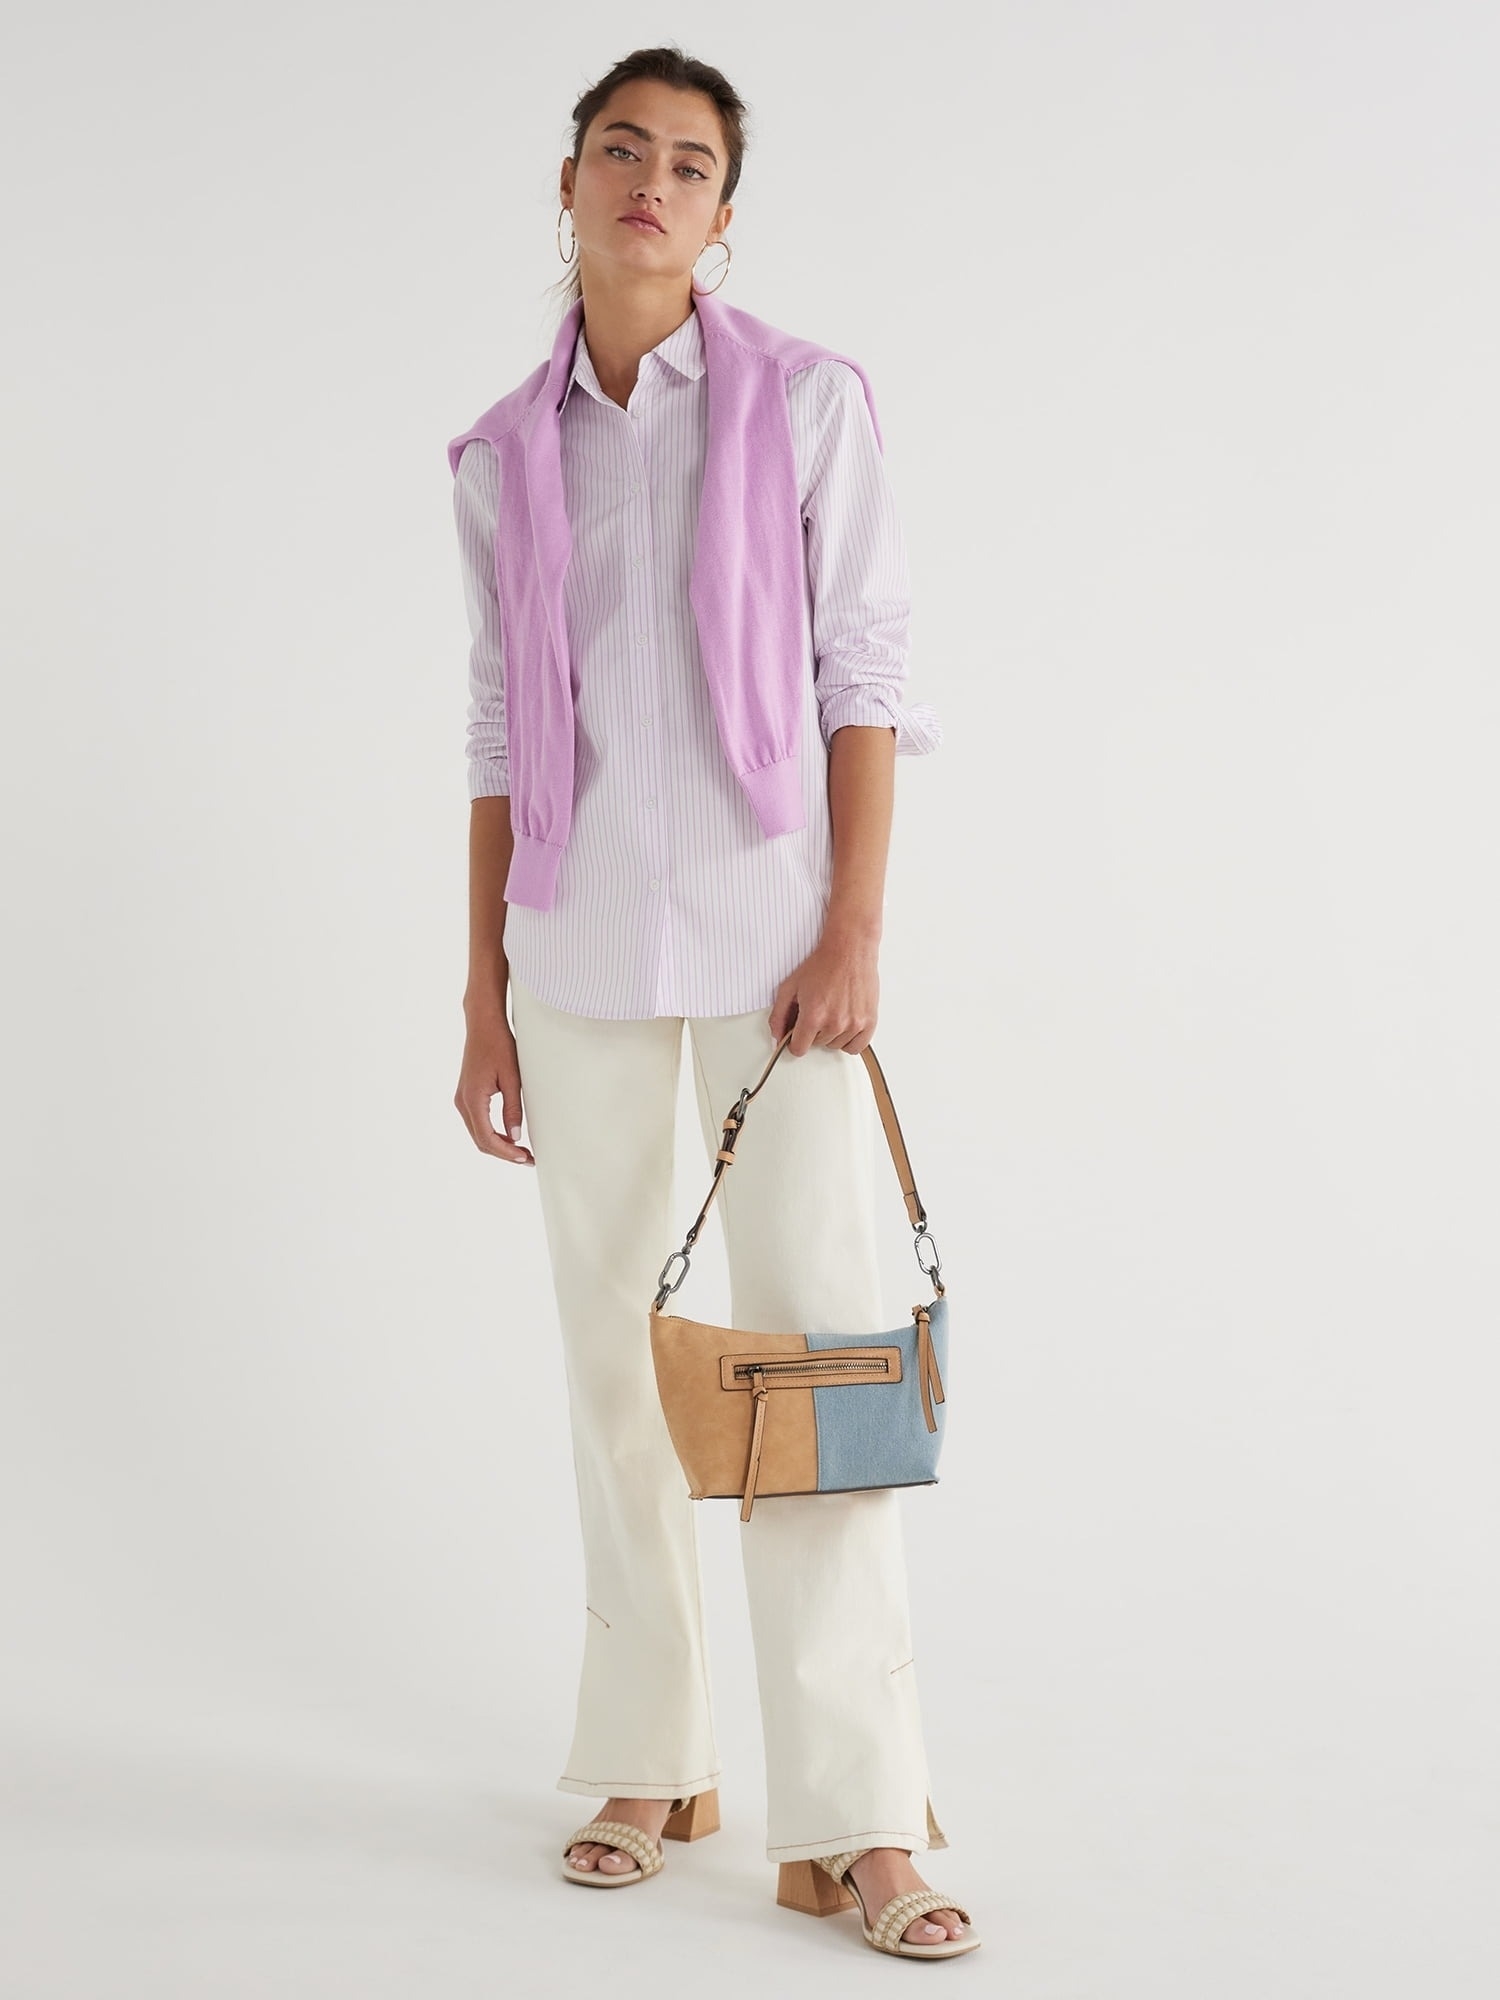 Model in a pink striped shirt, cream pants, holding a two-tone handbag